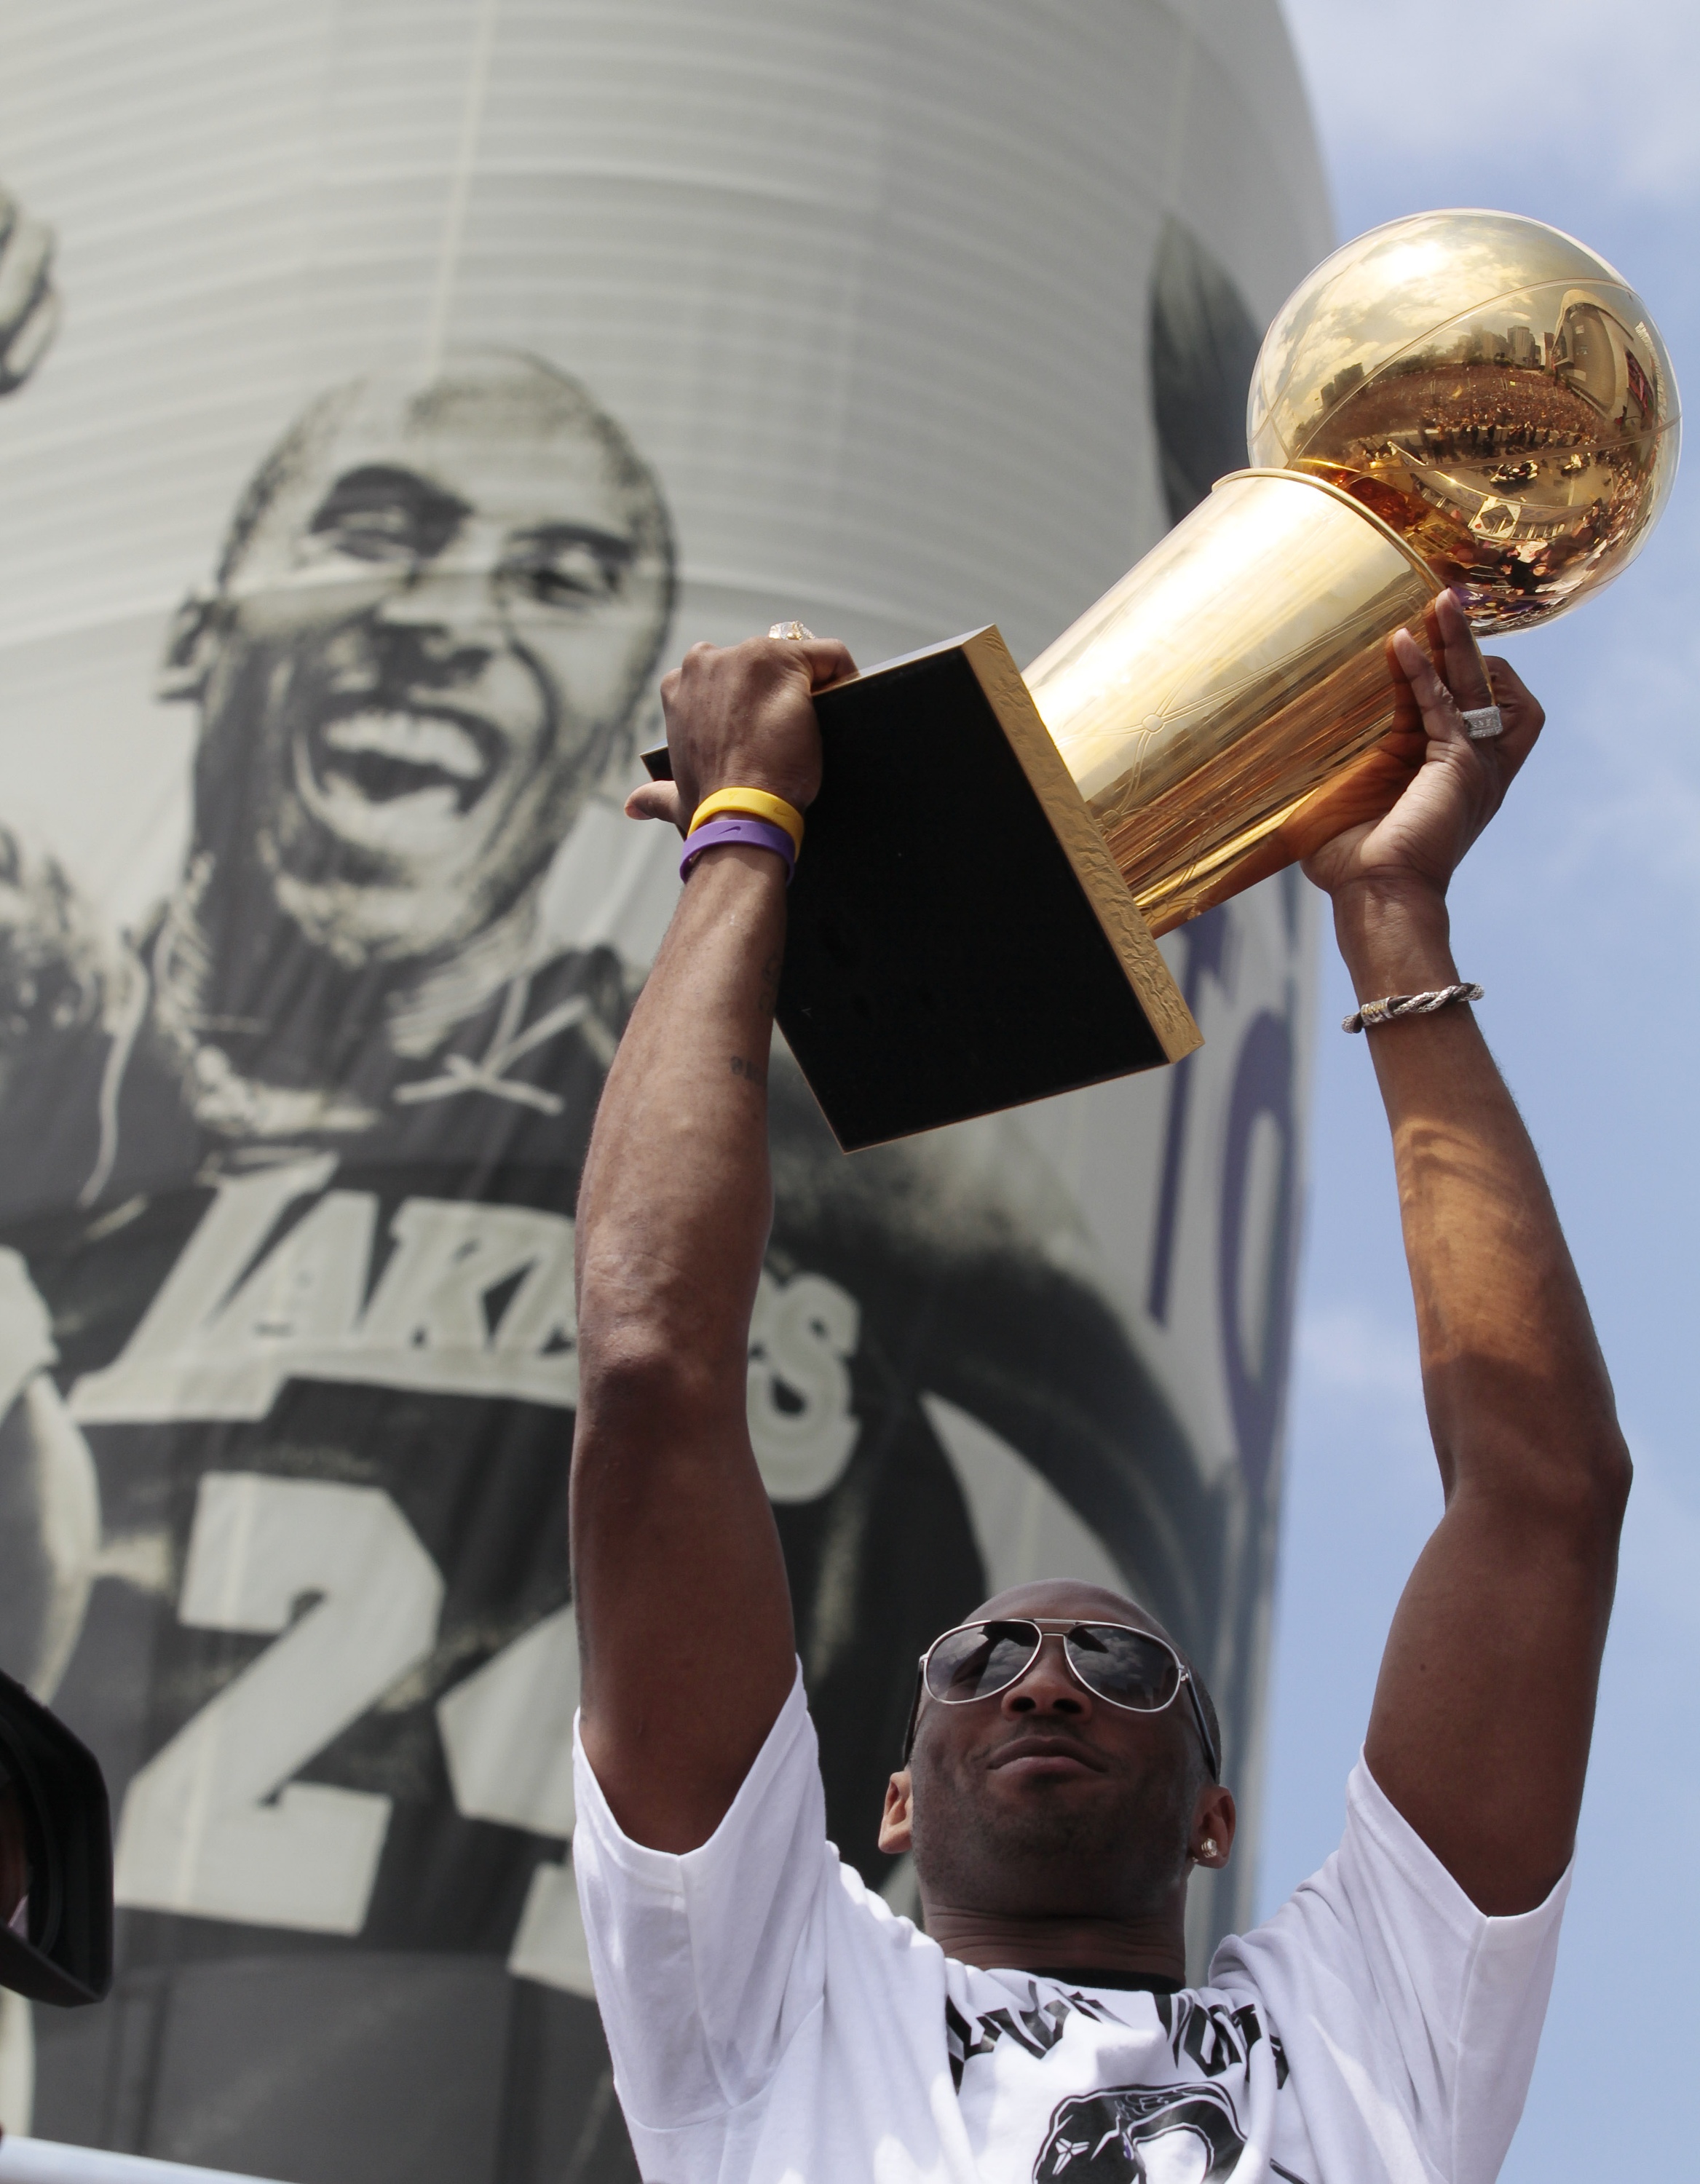 Los Angeles Lakers' Kobe Bryant, raises the NBA championship trophy in front of a poster of himself on the Staples Center during a victory parade for the teams 16th NBA title, in downtown Los Angeles on Monday June 21, 2010. (AP Photo/Richard Vogel)